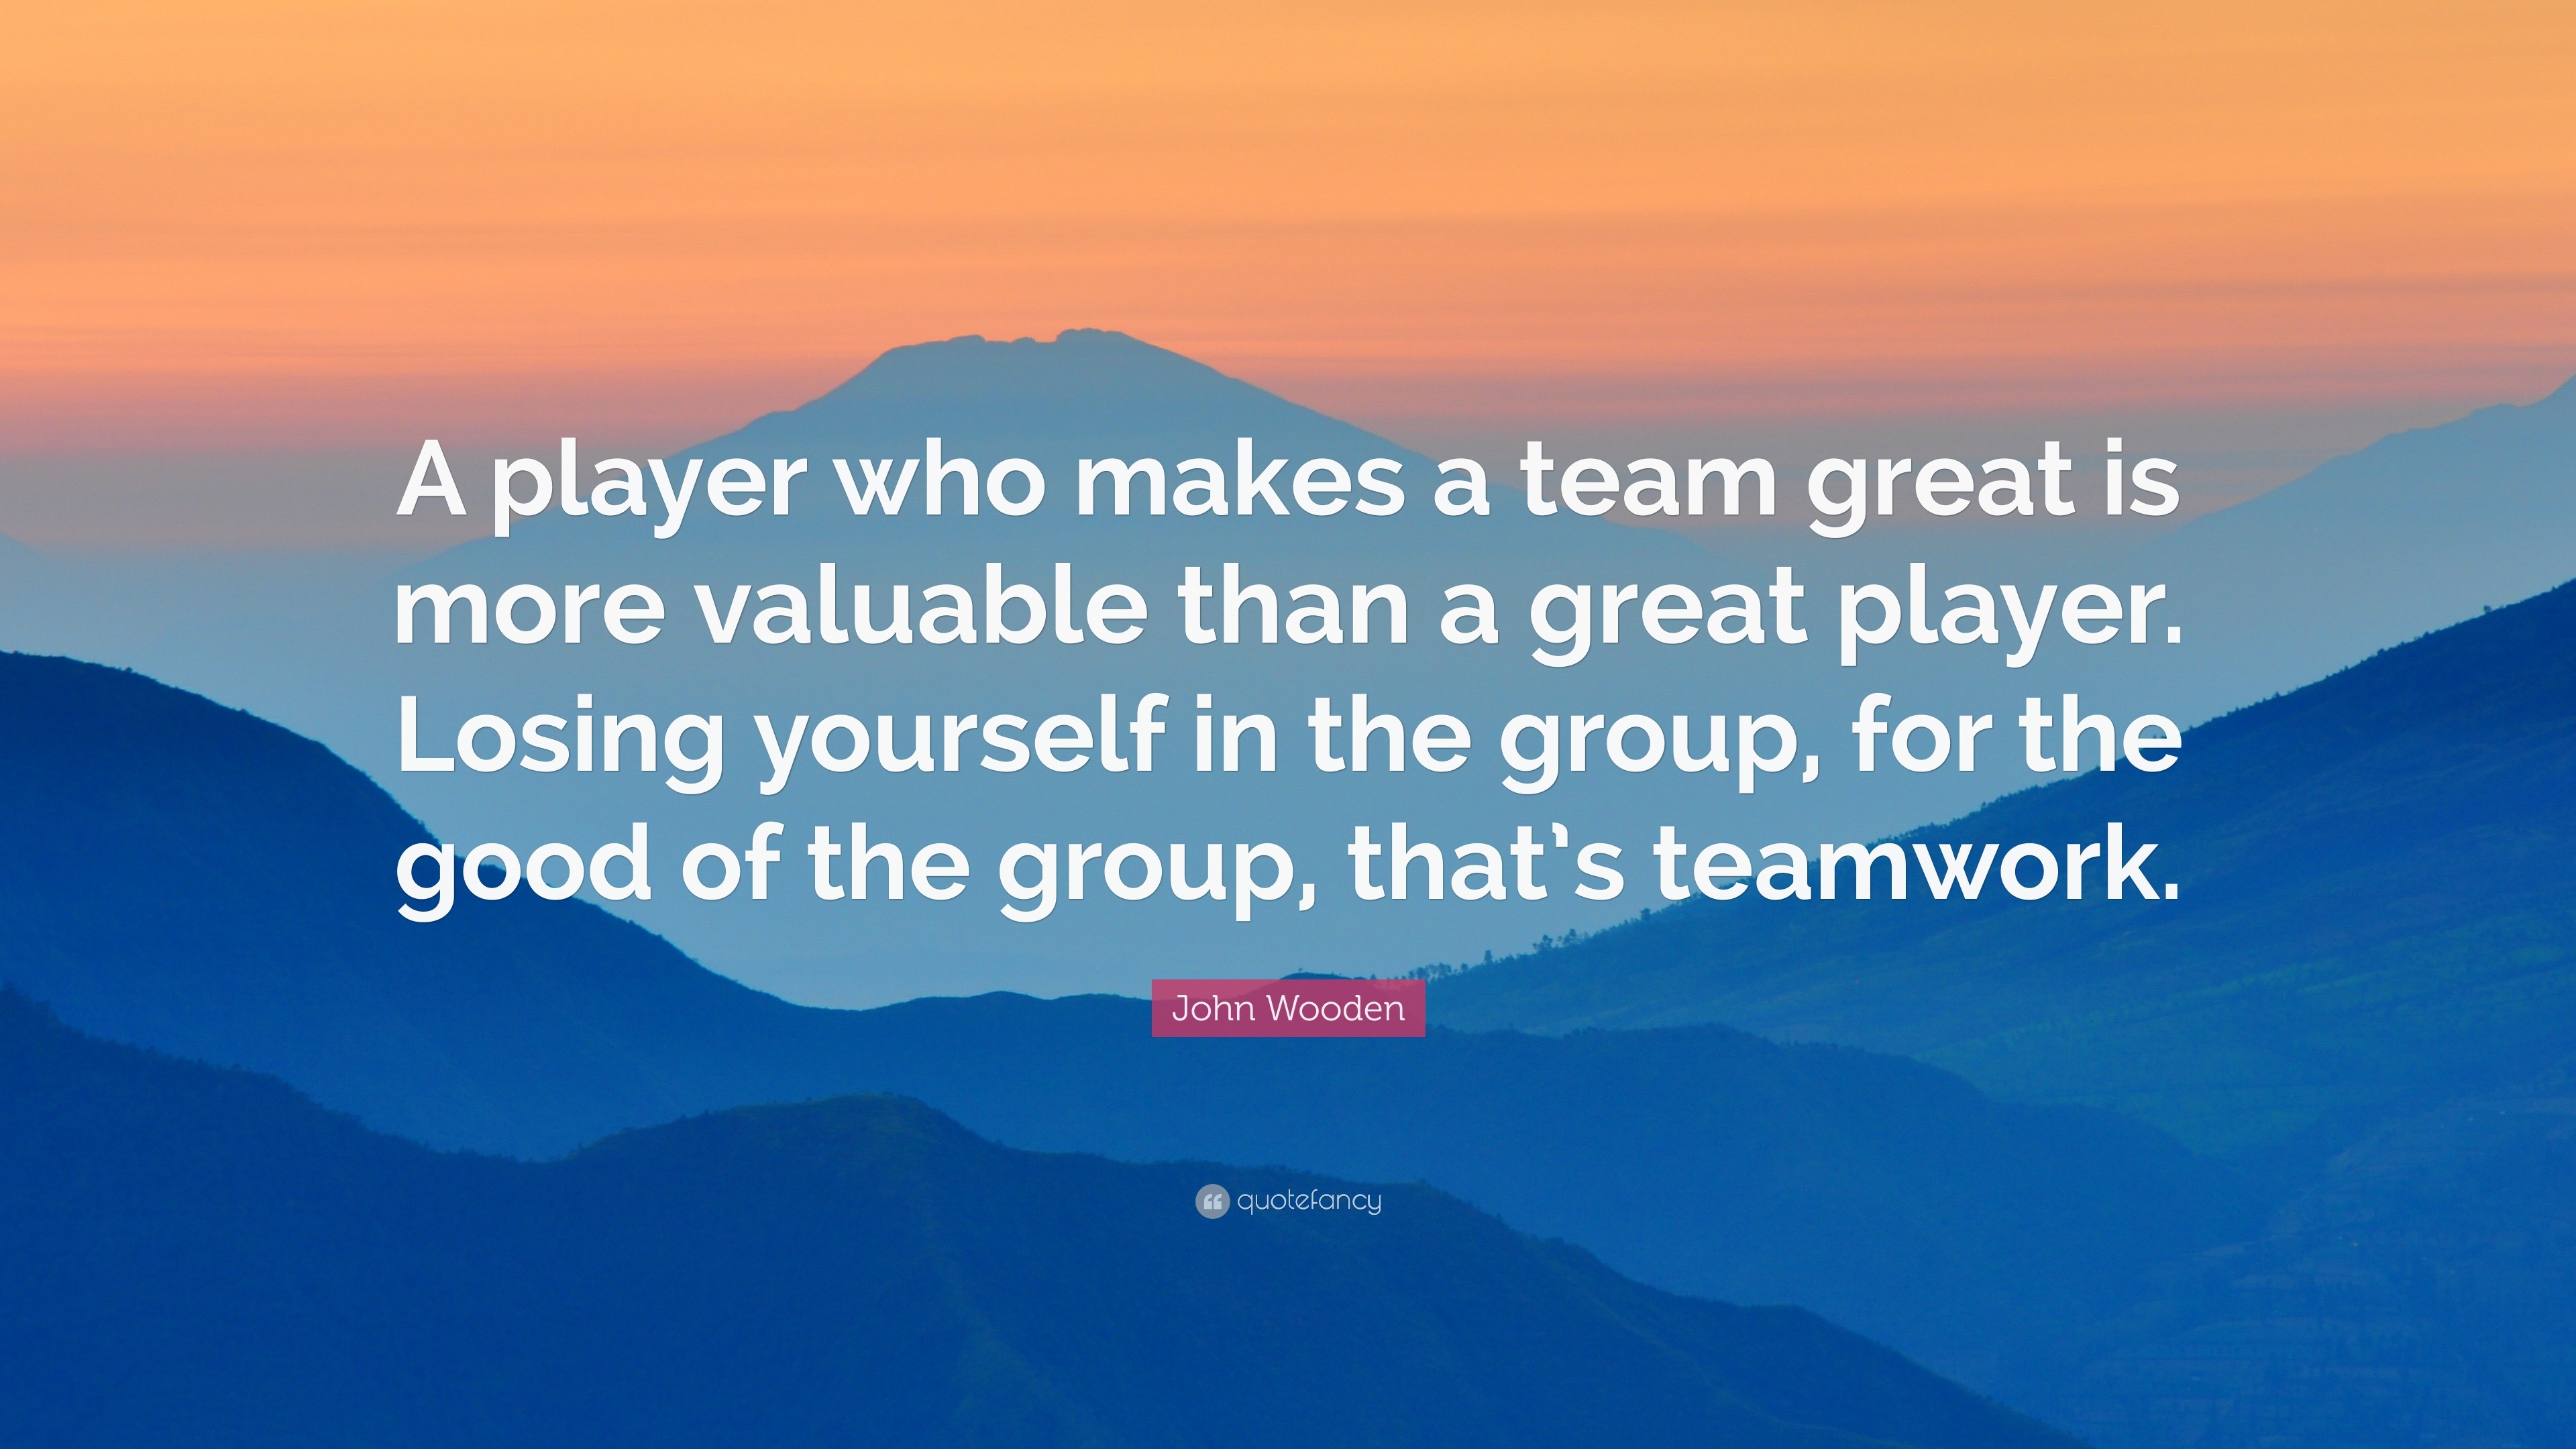 John Wooden Quote: “A player who makes a team great is more valuable ...